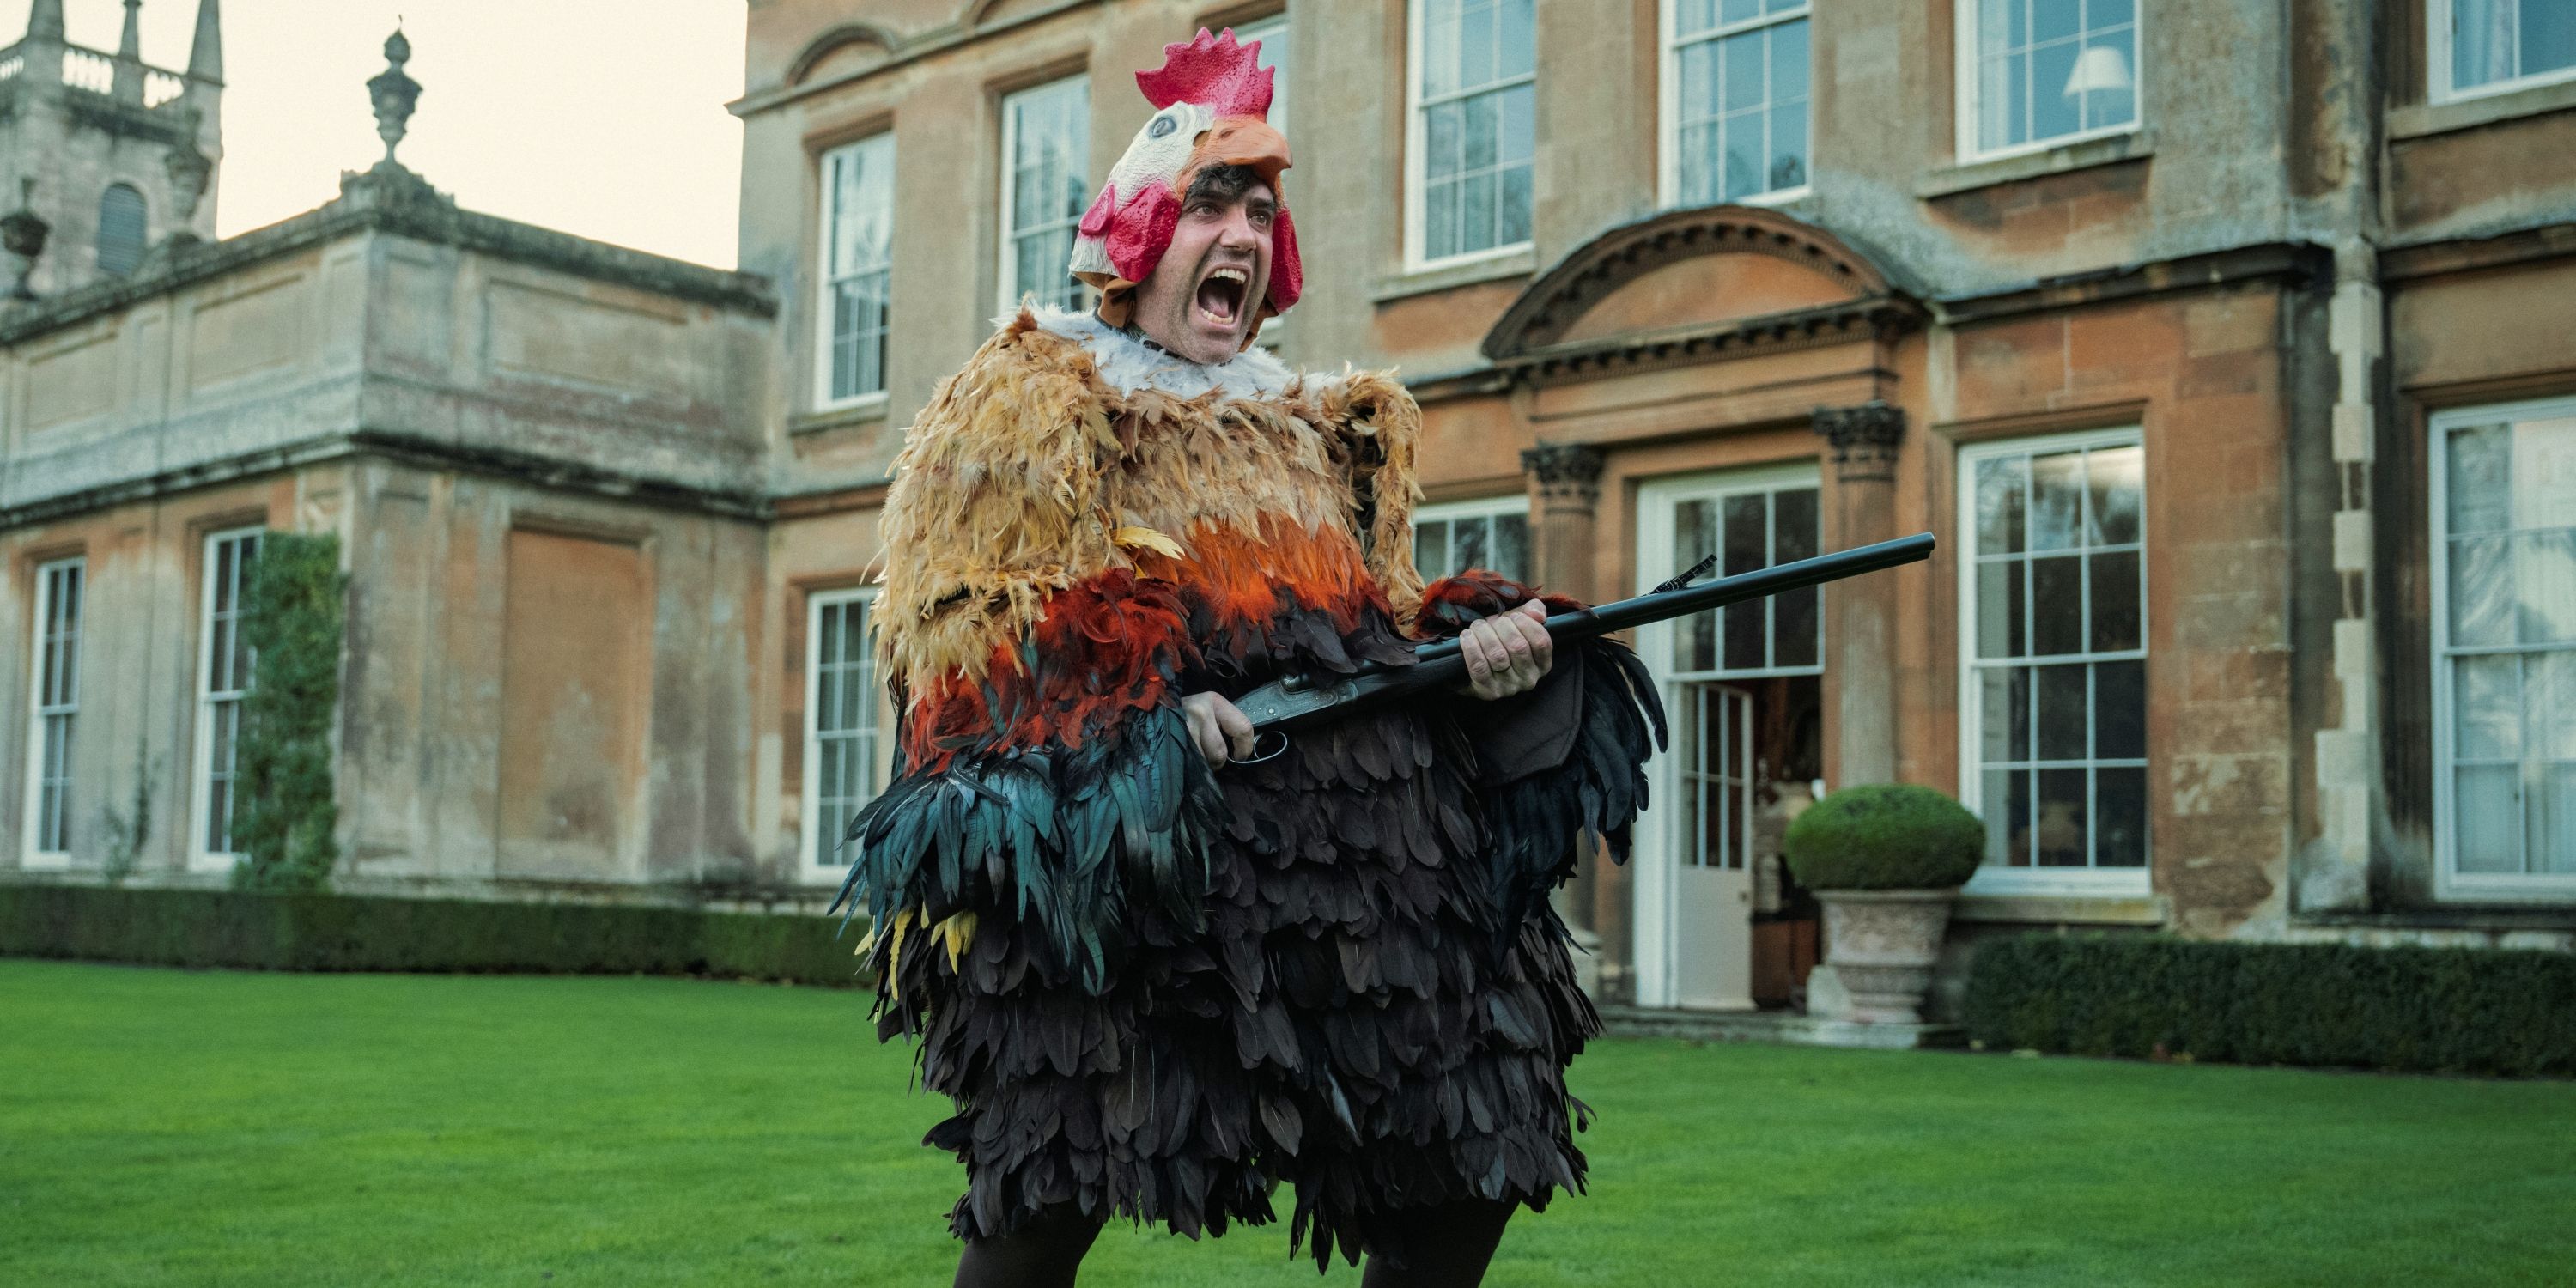 Daniel Ings as Freddy in a full chicken suit with feathers and a shotgun in Episode 2 of The Gentlemen